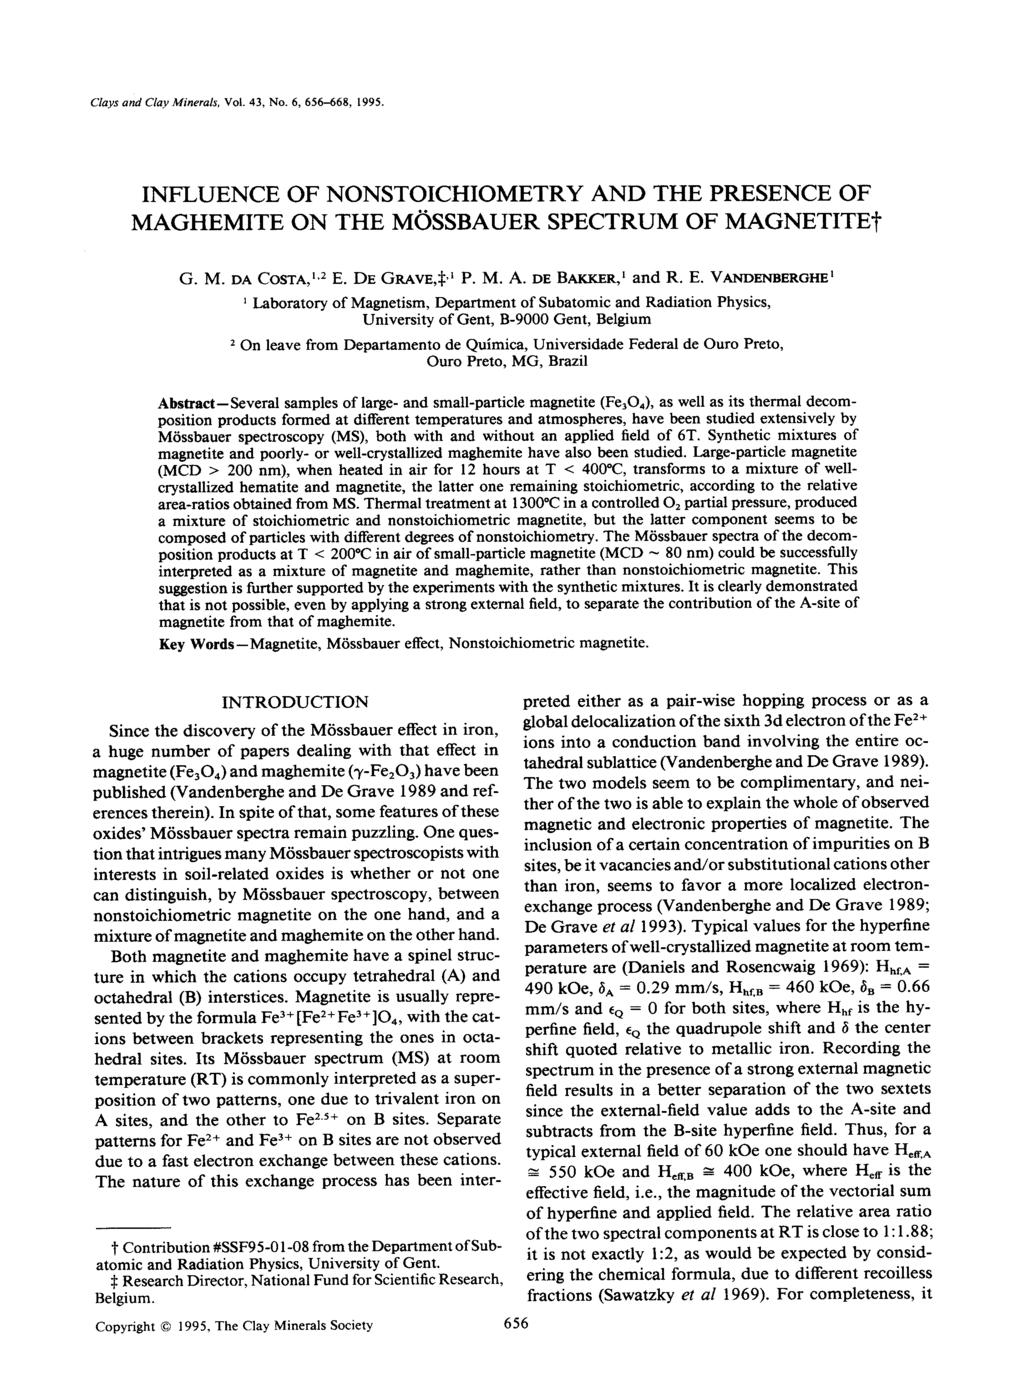 Clays and Clay Minerals, Vol. 43, No. 6, 656-668, 1995. INFLUENCE OF NONSTOICHIOMETRY AND THE PRESENCE OF MAGHEMITE ON THE MOSSBAUER SPECTRUM OF MAGNETITEt G. M. DA COSTA, 1'2 E. DE GRAVE,~ 'l P. M. A. DE BAKKER, 1 and R.